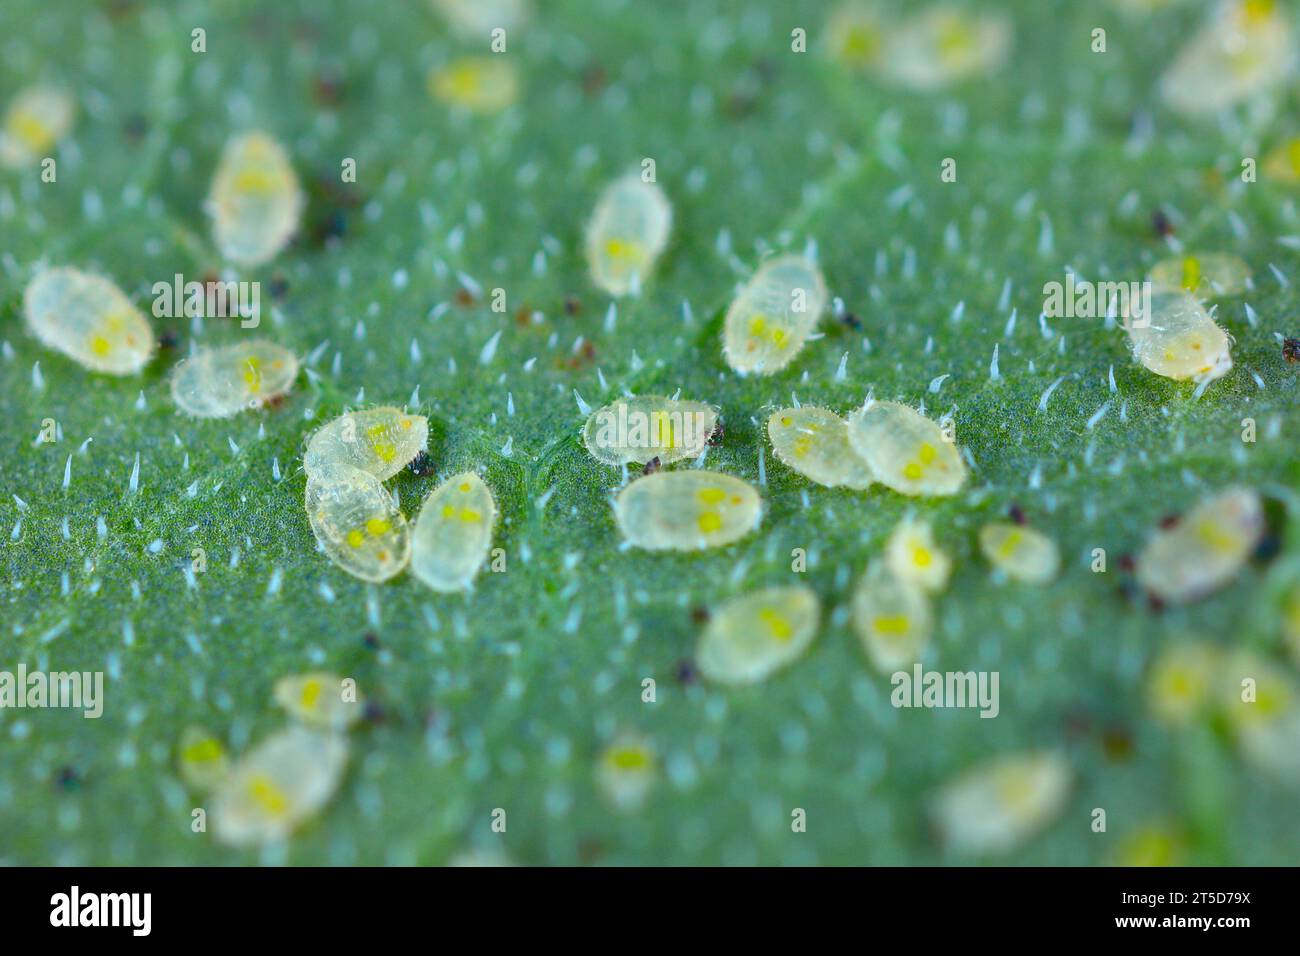 Leaf of a cucumber plant infested by whitefly. Stock Photo